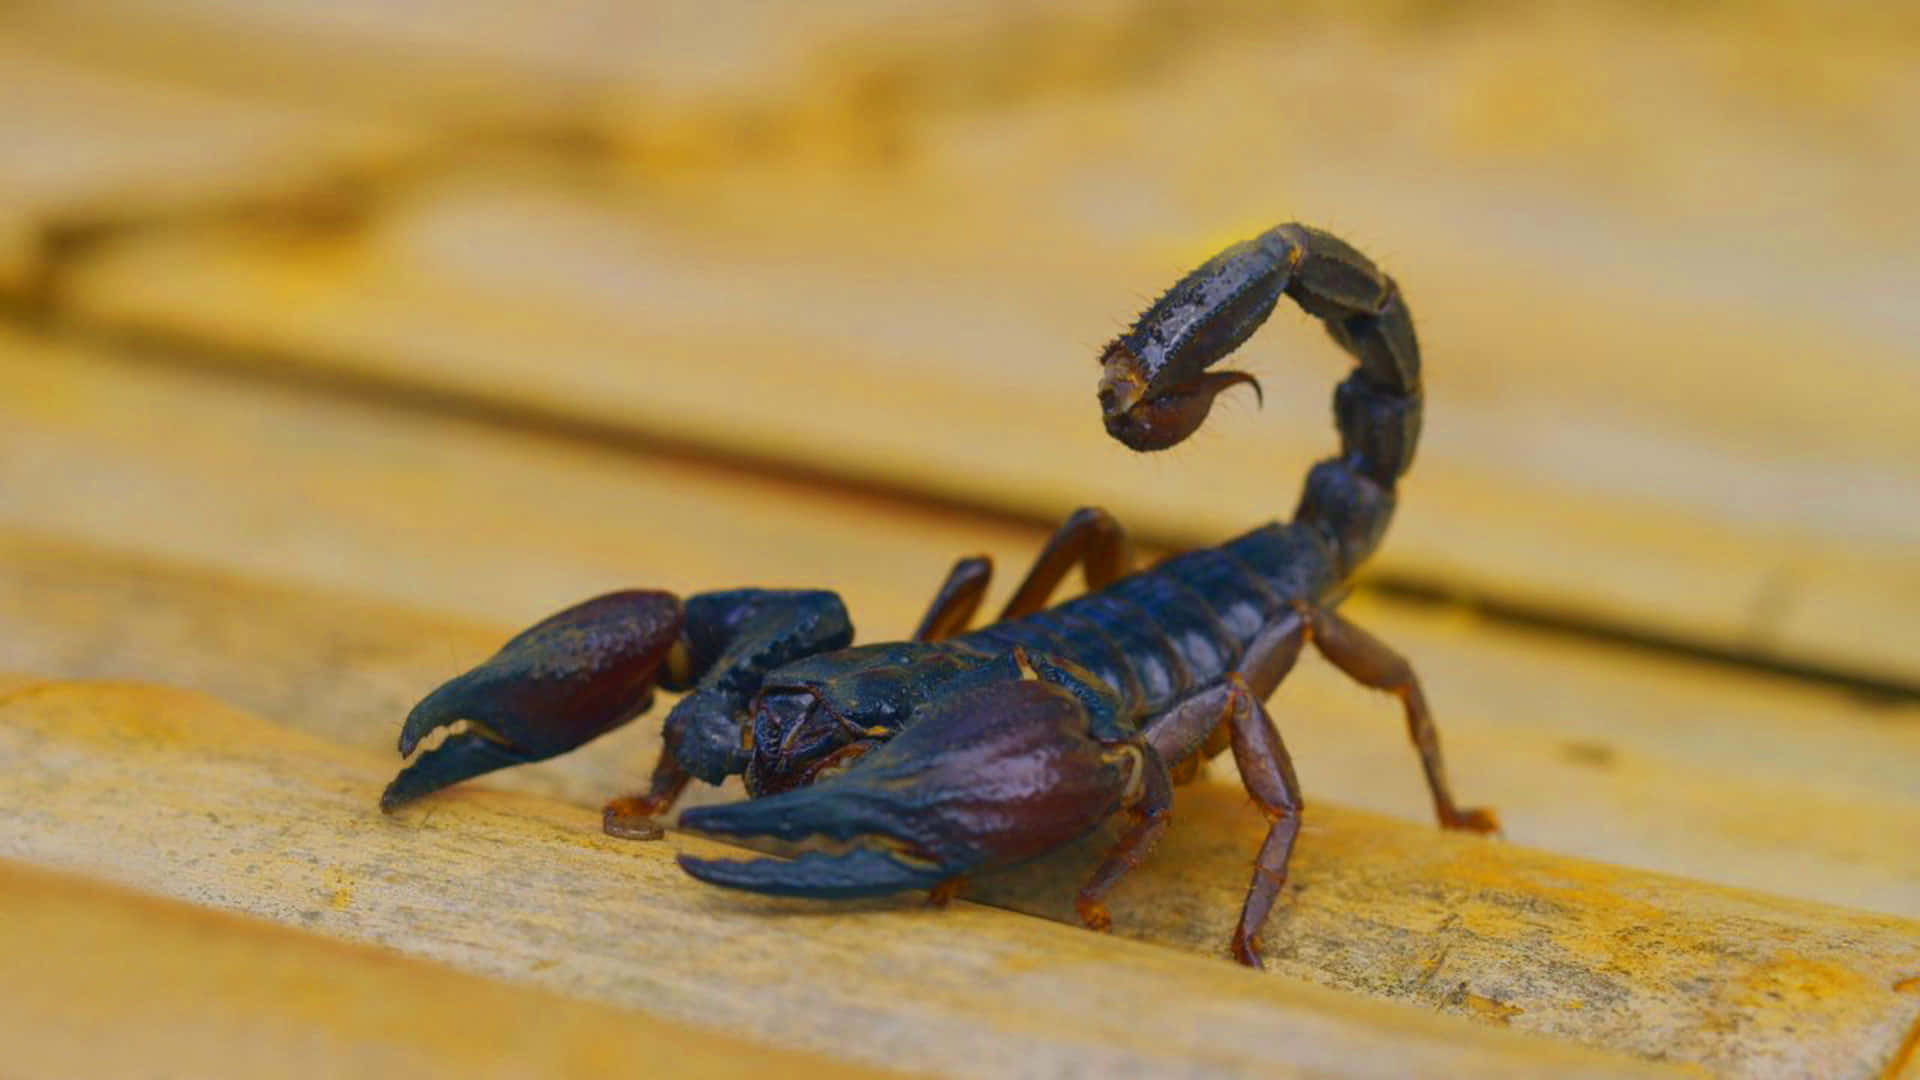 This fierce scorpion is a testament to nature's resilience